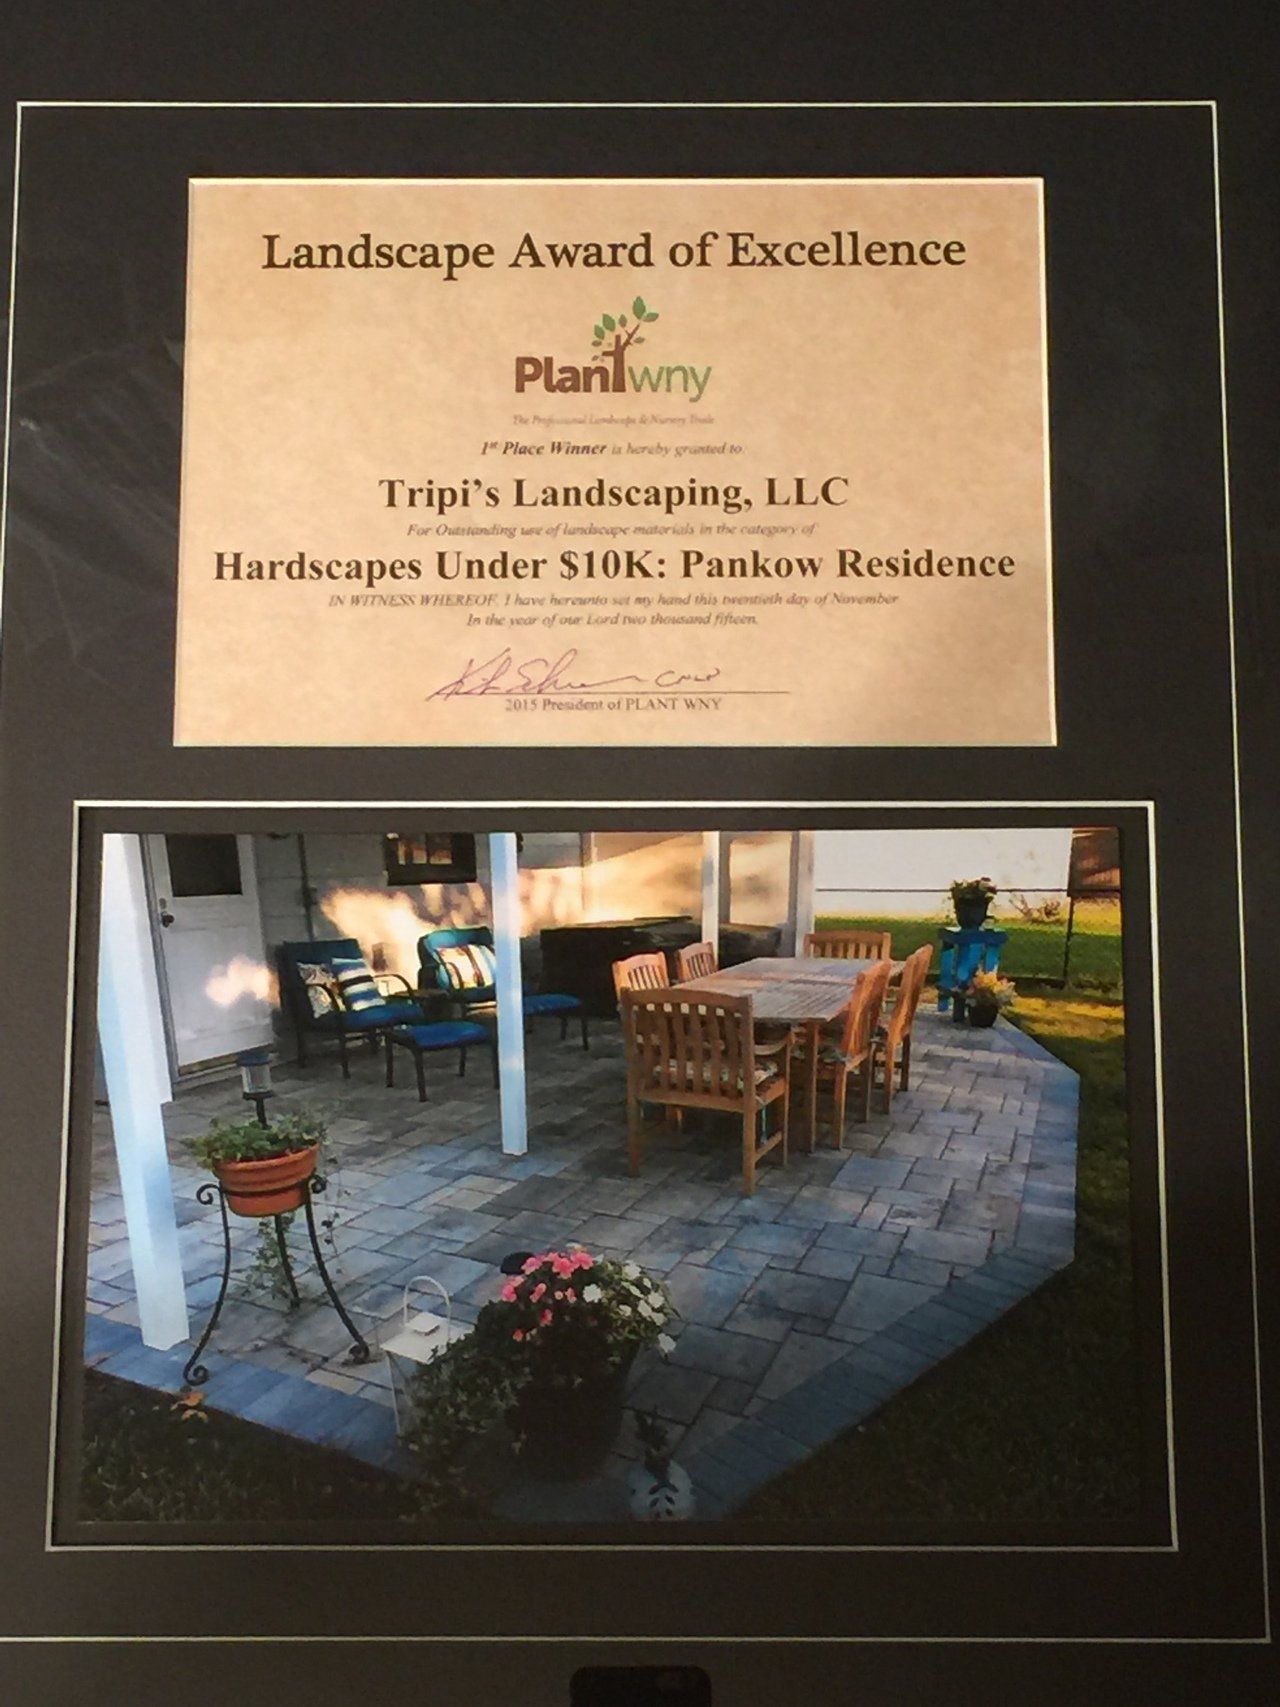 Tripi's Landscaping - Award of Excellence